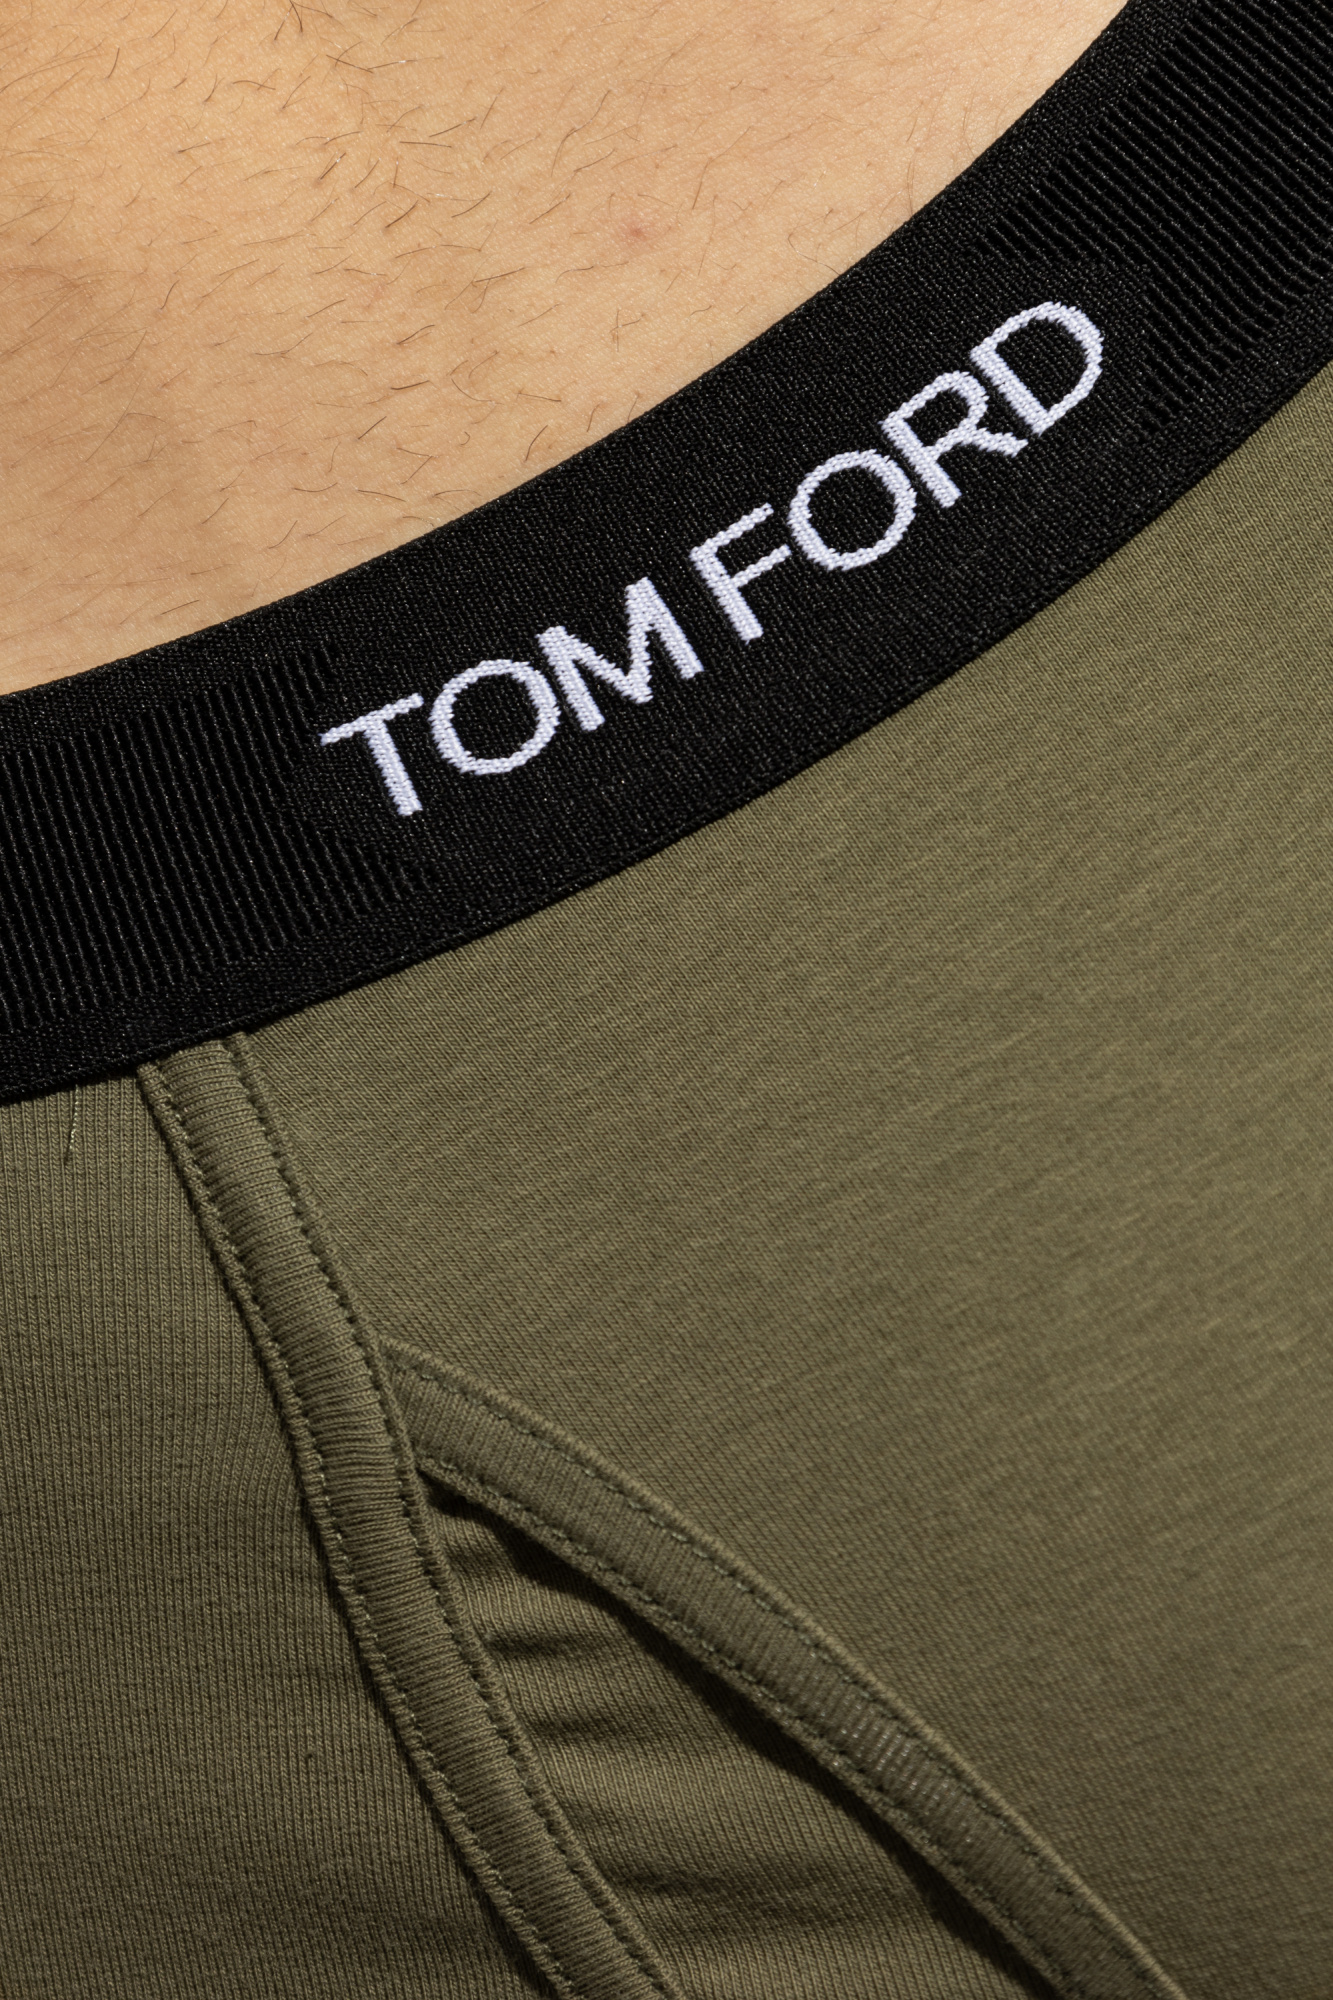 Tom Ford Cotton Boxers